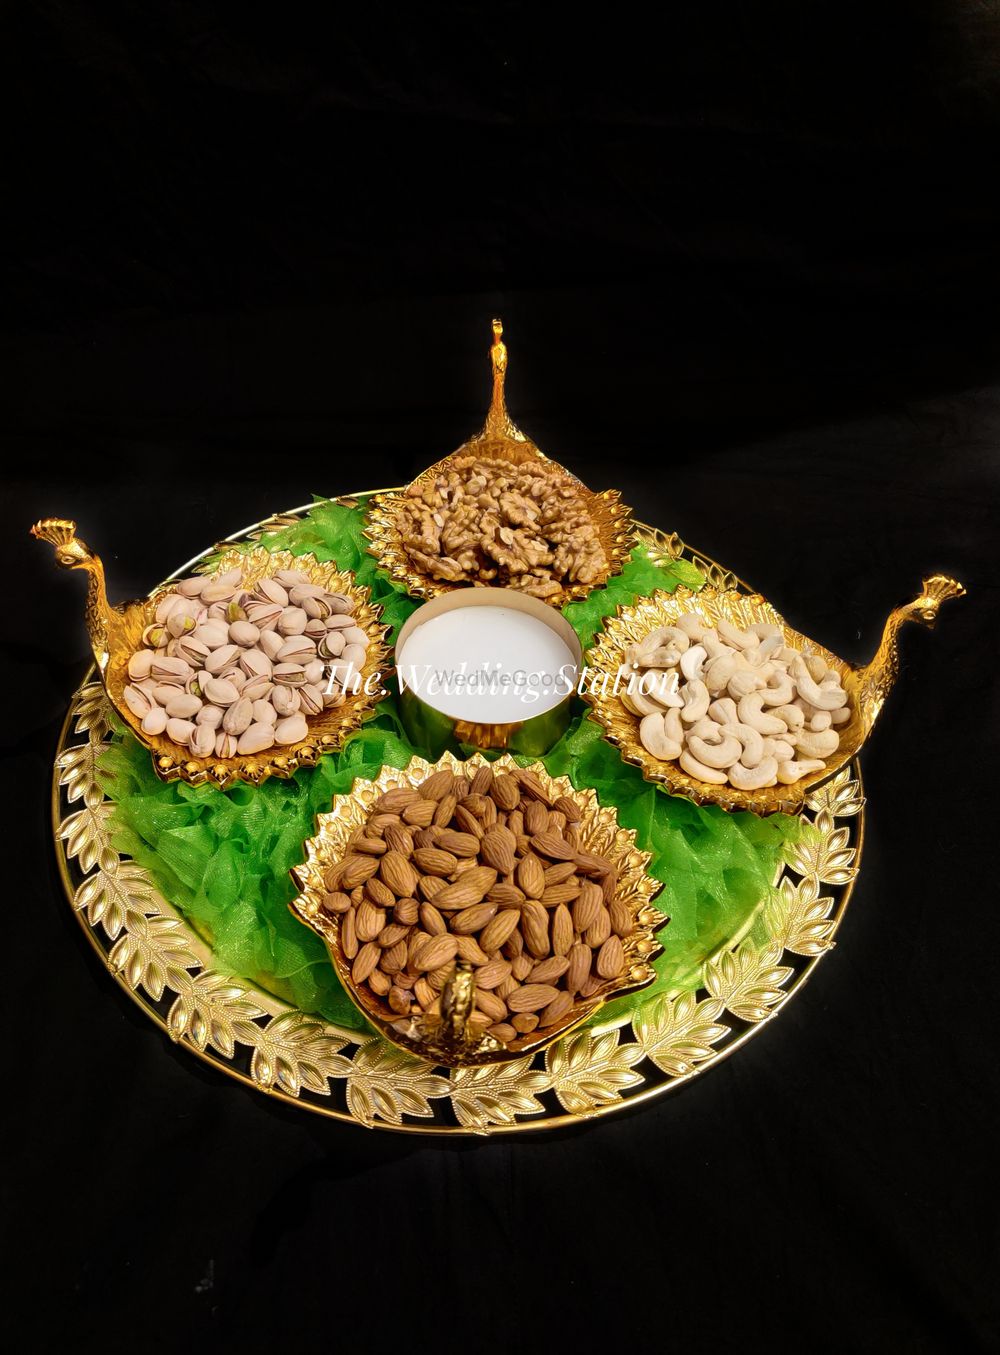 Photo From Dry Fruits Presentation - By The.Wedding.Station